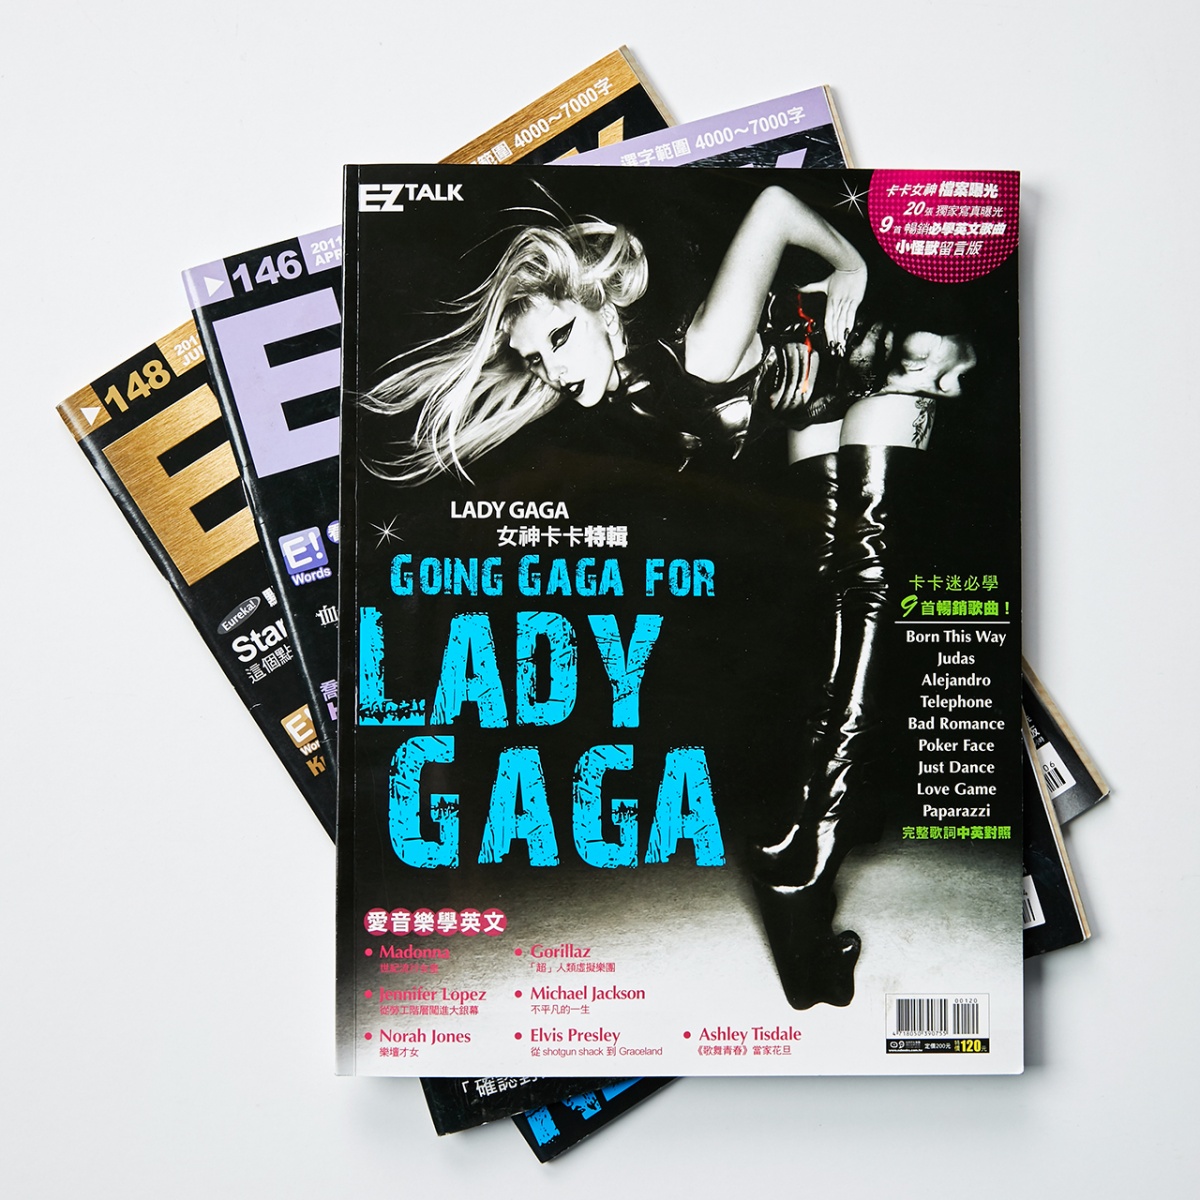 Lady Gaga cover story layout design on fashion category magazine public in Taiwan in 2011 June